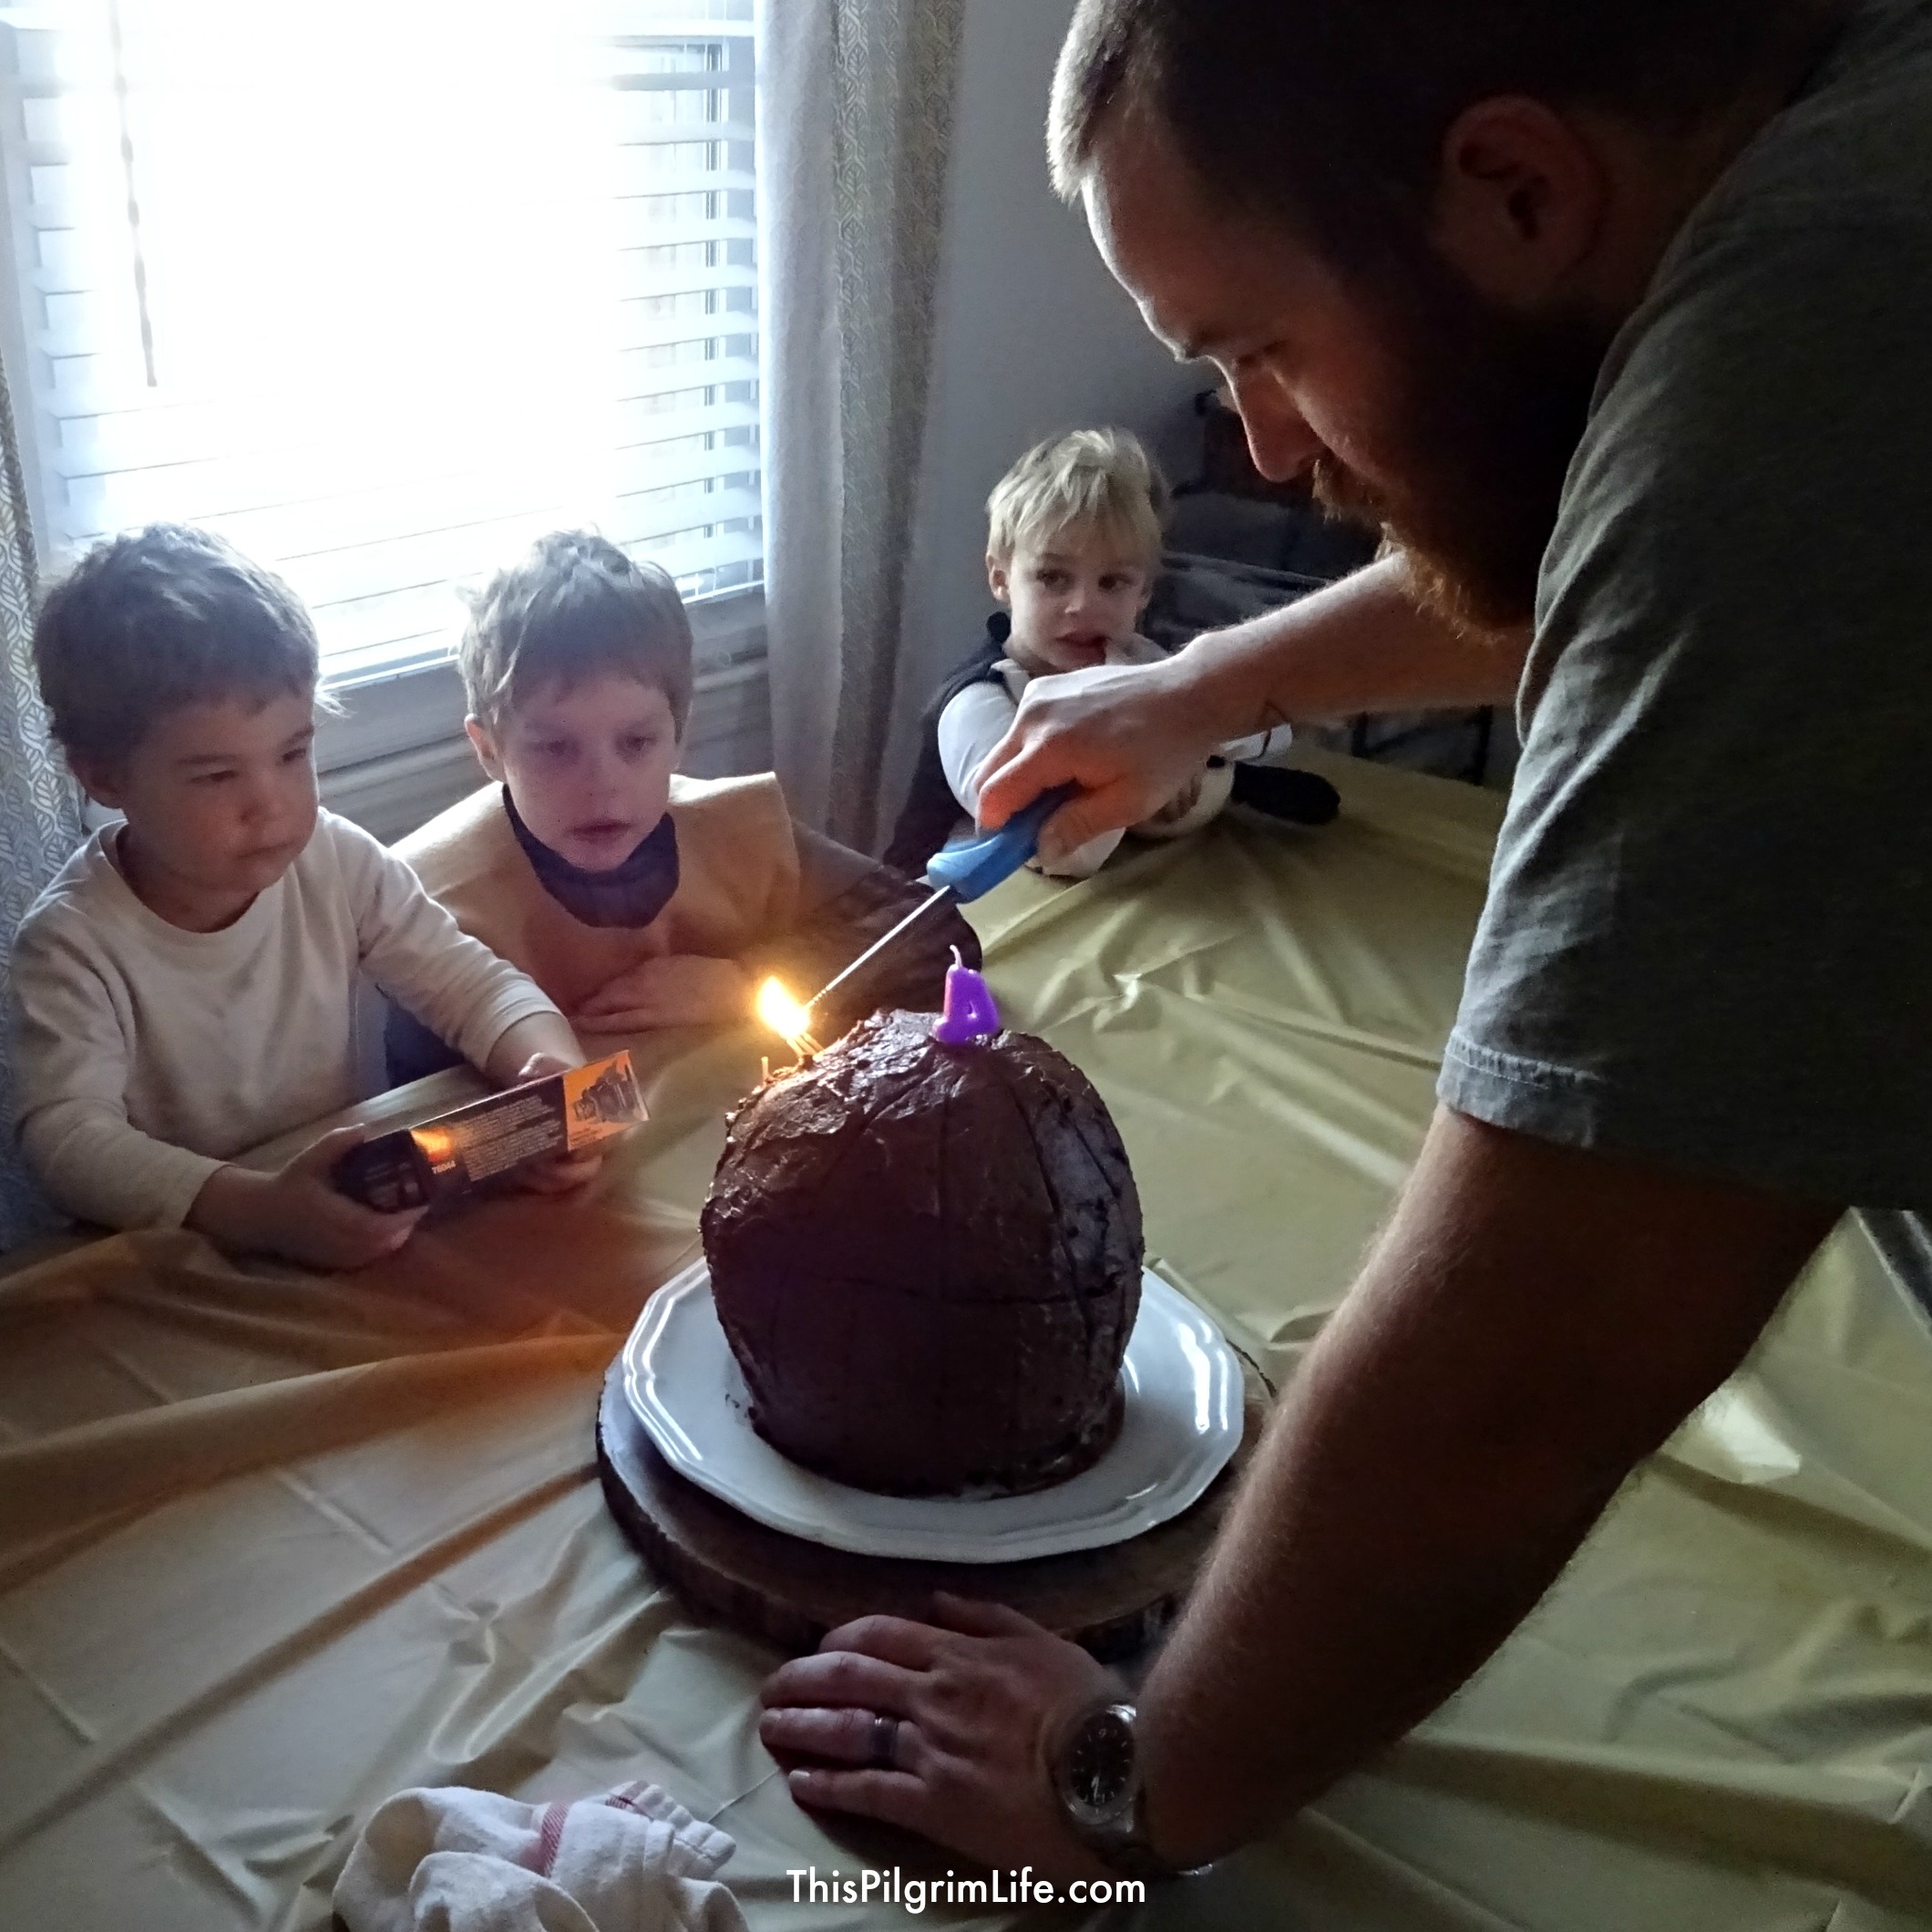 This weekend we celebrated my son's fourth birthday with a Star Wars Jedi Training party. He and several of his friends practiced their light saber skills, droid building skills, and more during the simple birthday party.